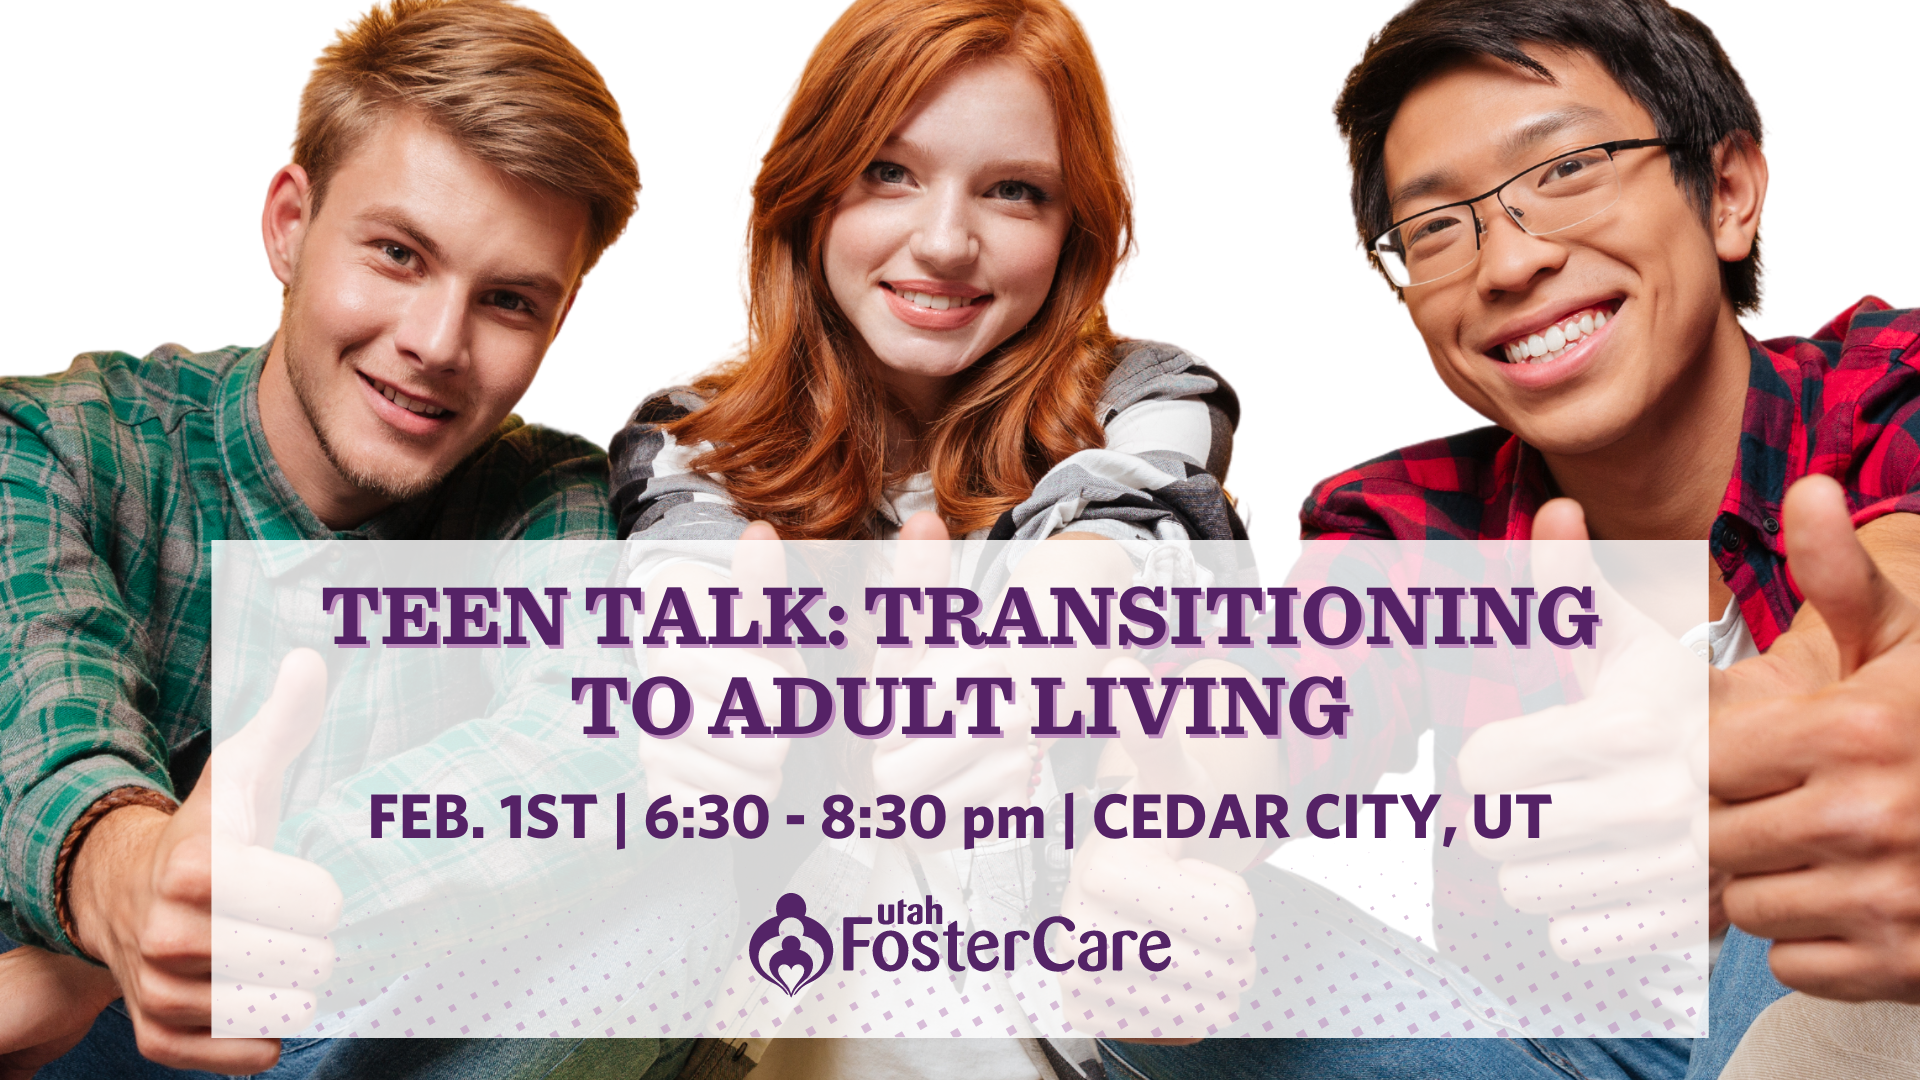 Teen Talk: Transitioning to Adult Living - Utah Foster Care Event